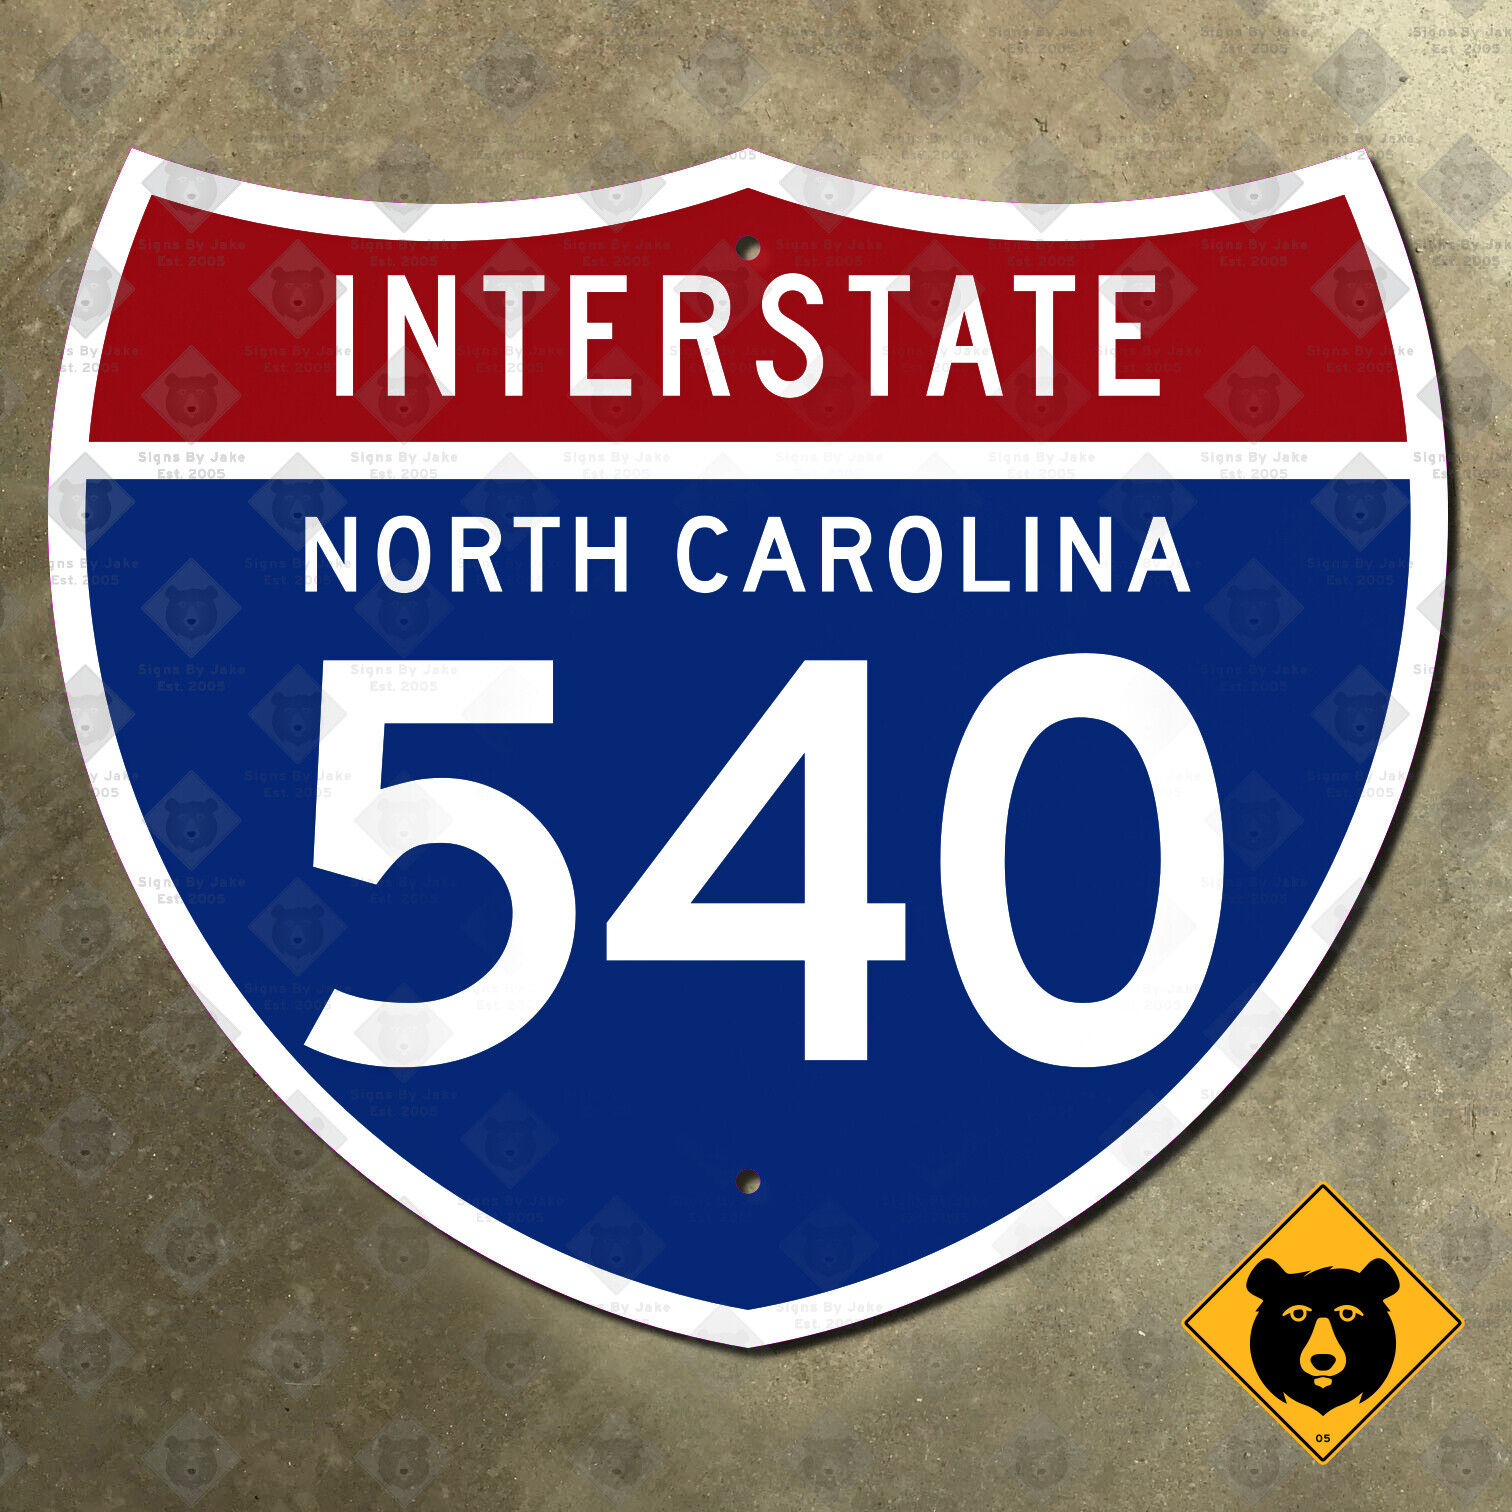 North Carolina Interstate 540 highway route sign 1957 Raleigh Cary 21x18